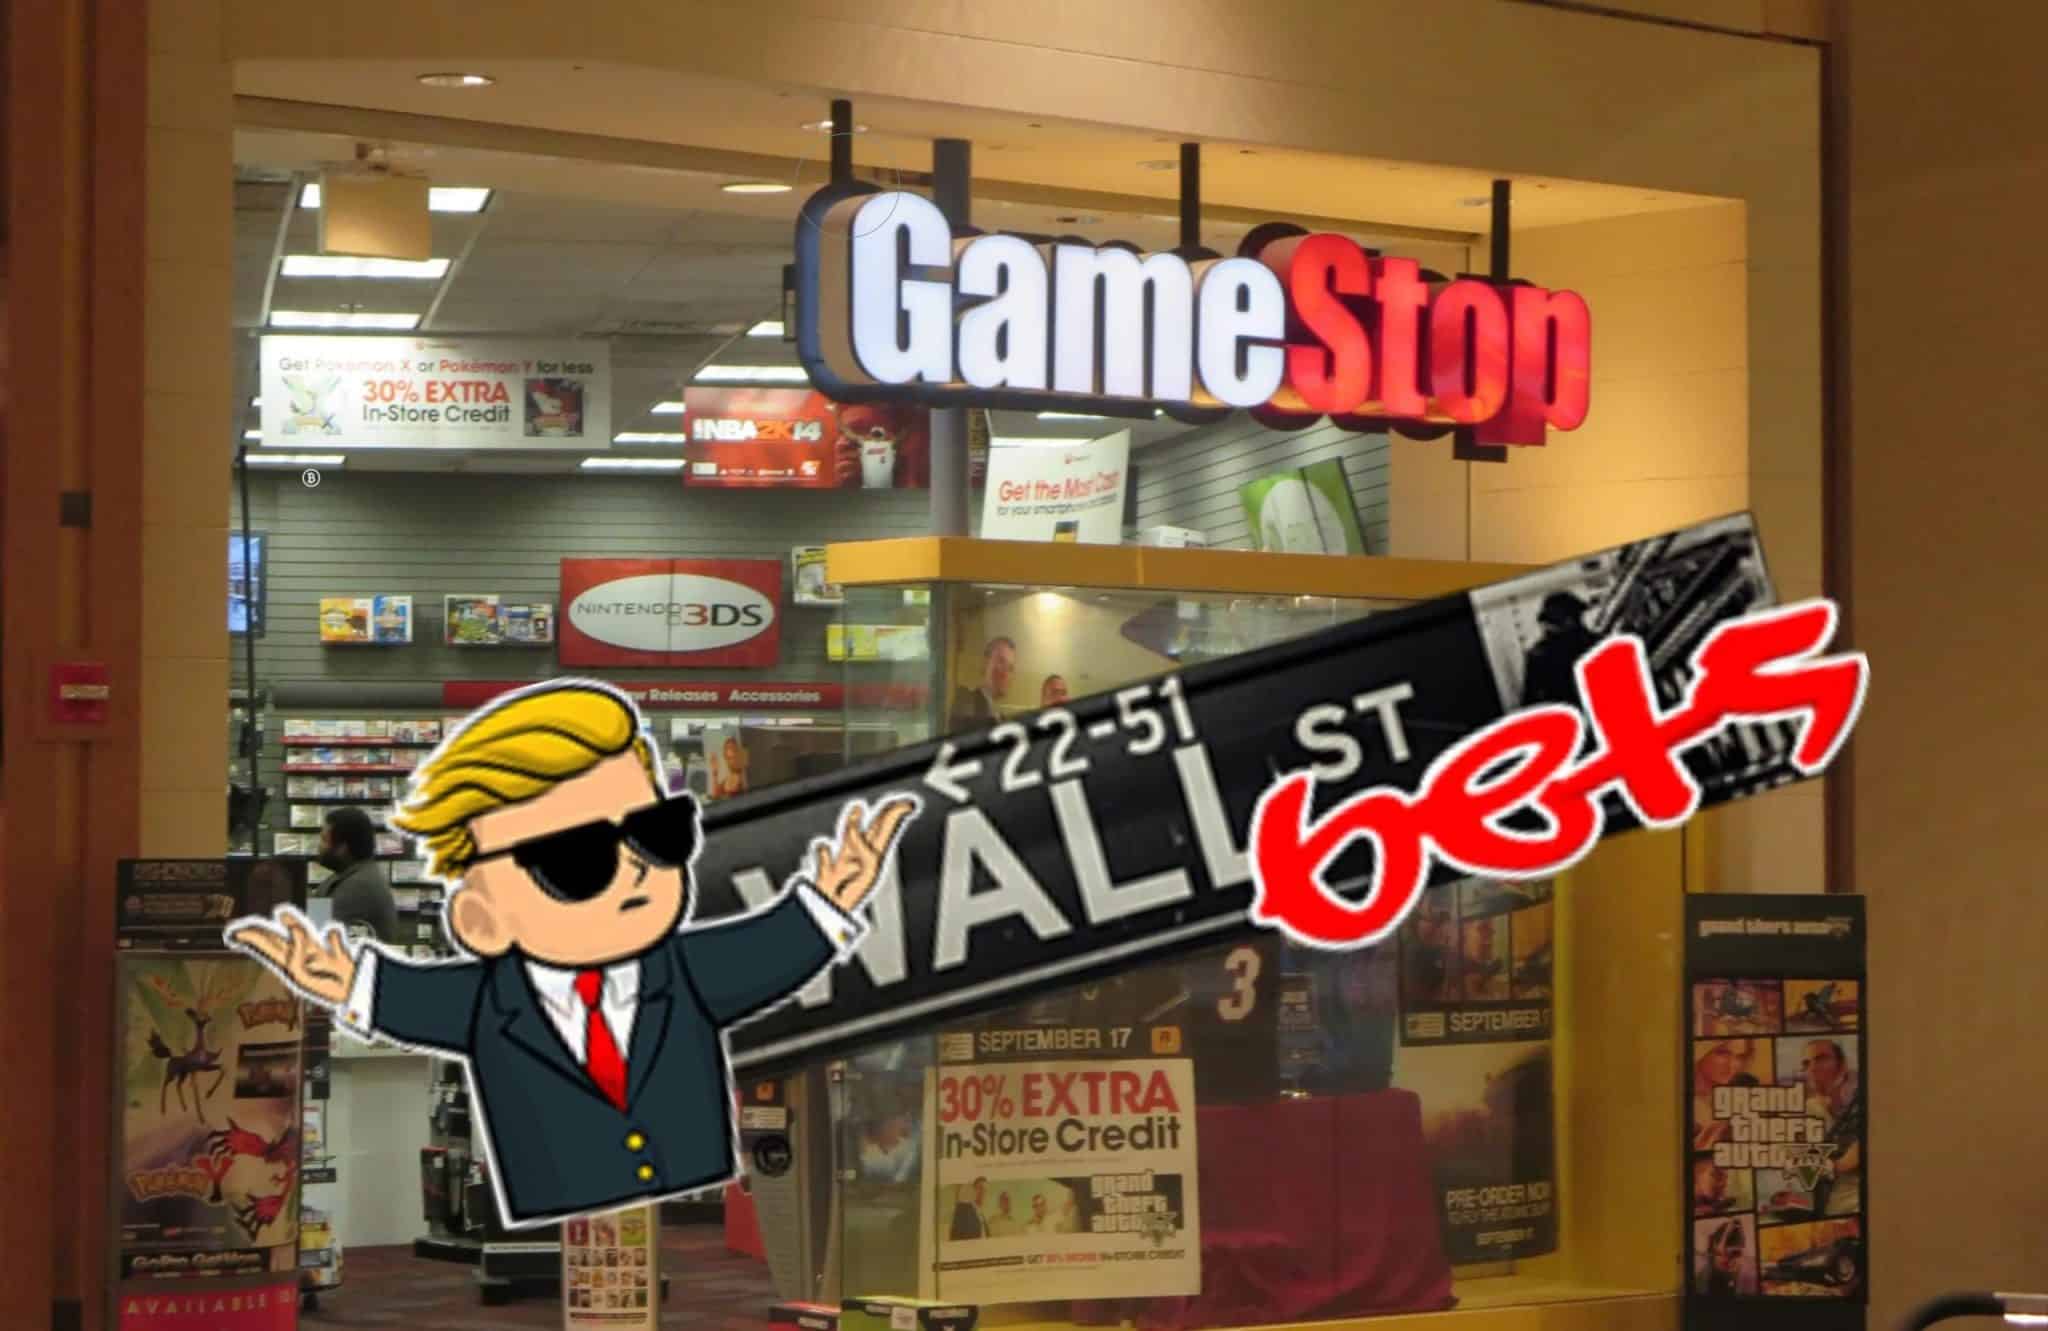 Roaring Kitty is back after 3 year hiatus following Wall Street Bets legendary GameStop (GME) short squeeze, here's what it means for crypto.